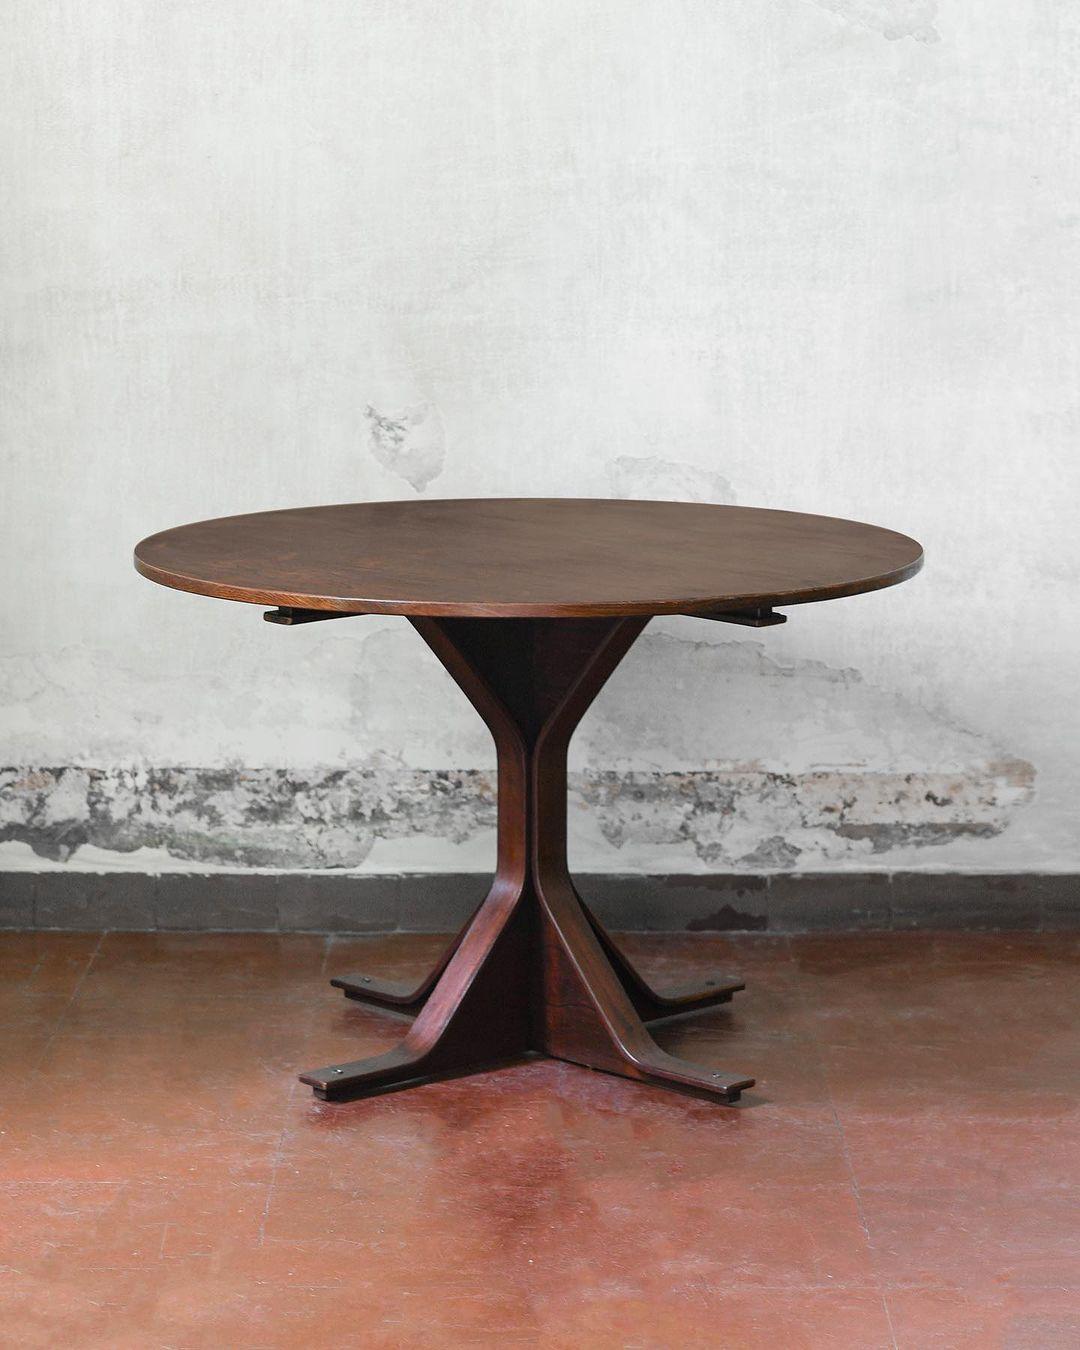 Model 522 table by Gianfranco Frattini for Bernini, Italy 1960
Product details
Dimensions: 74 H x 111 D cm